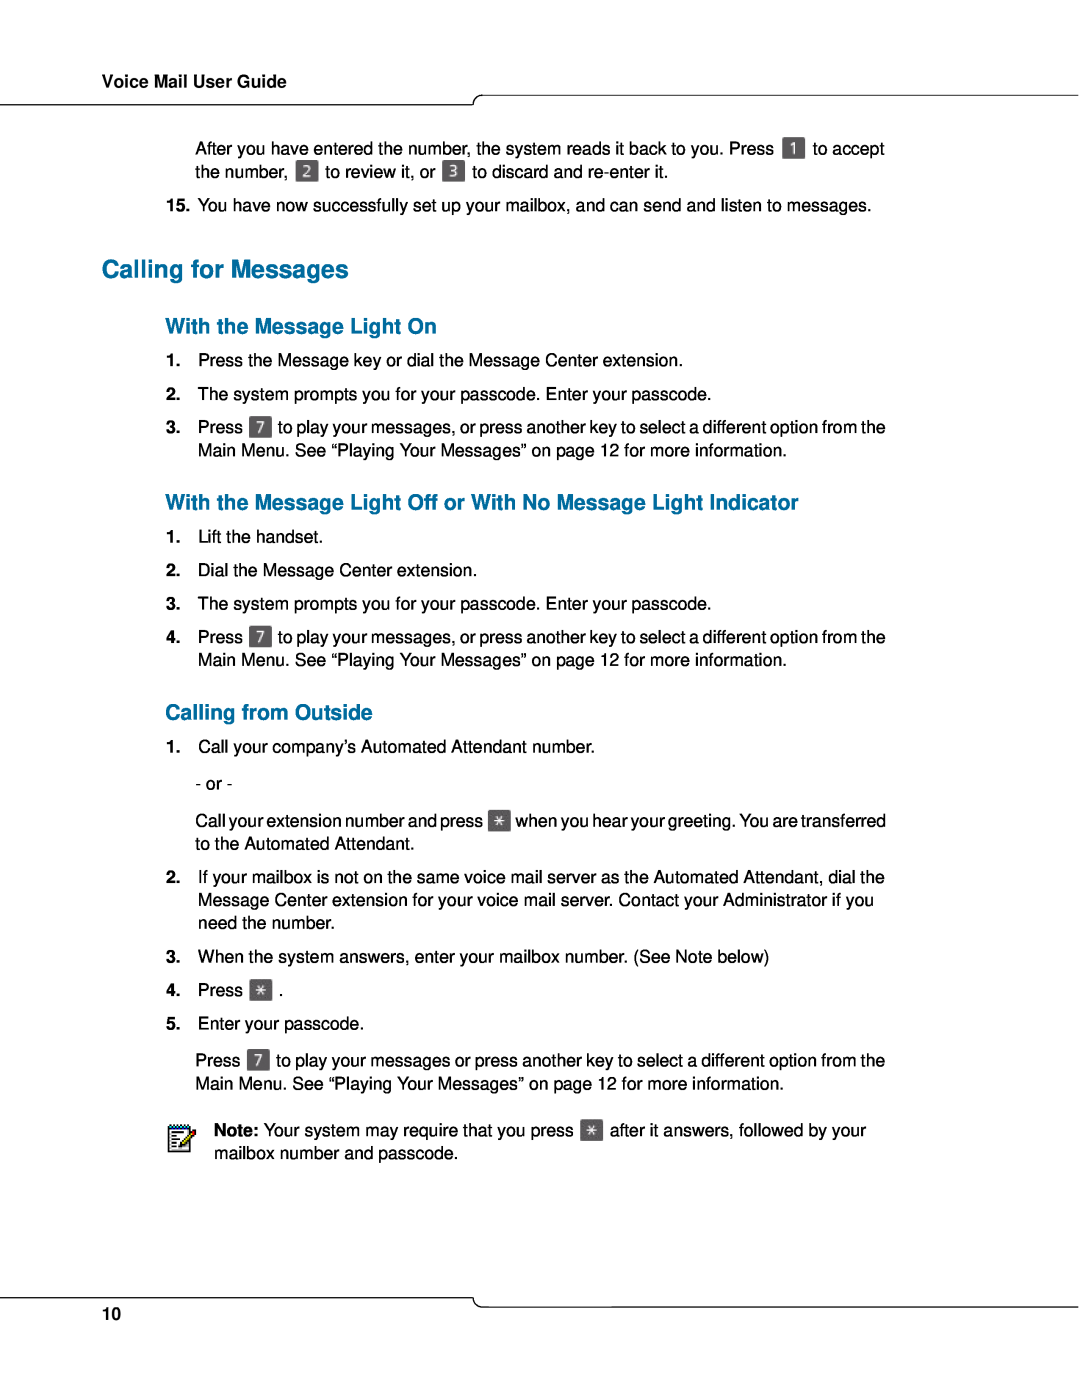 Mitel 3300 manual Calling for Messages, With the Message Light On, Calling from Outside, Voice Mail User Guide 